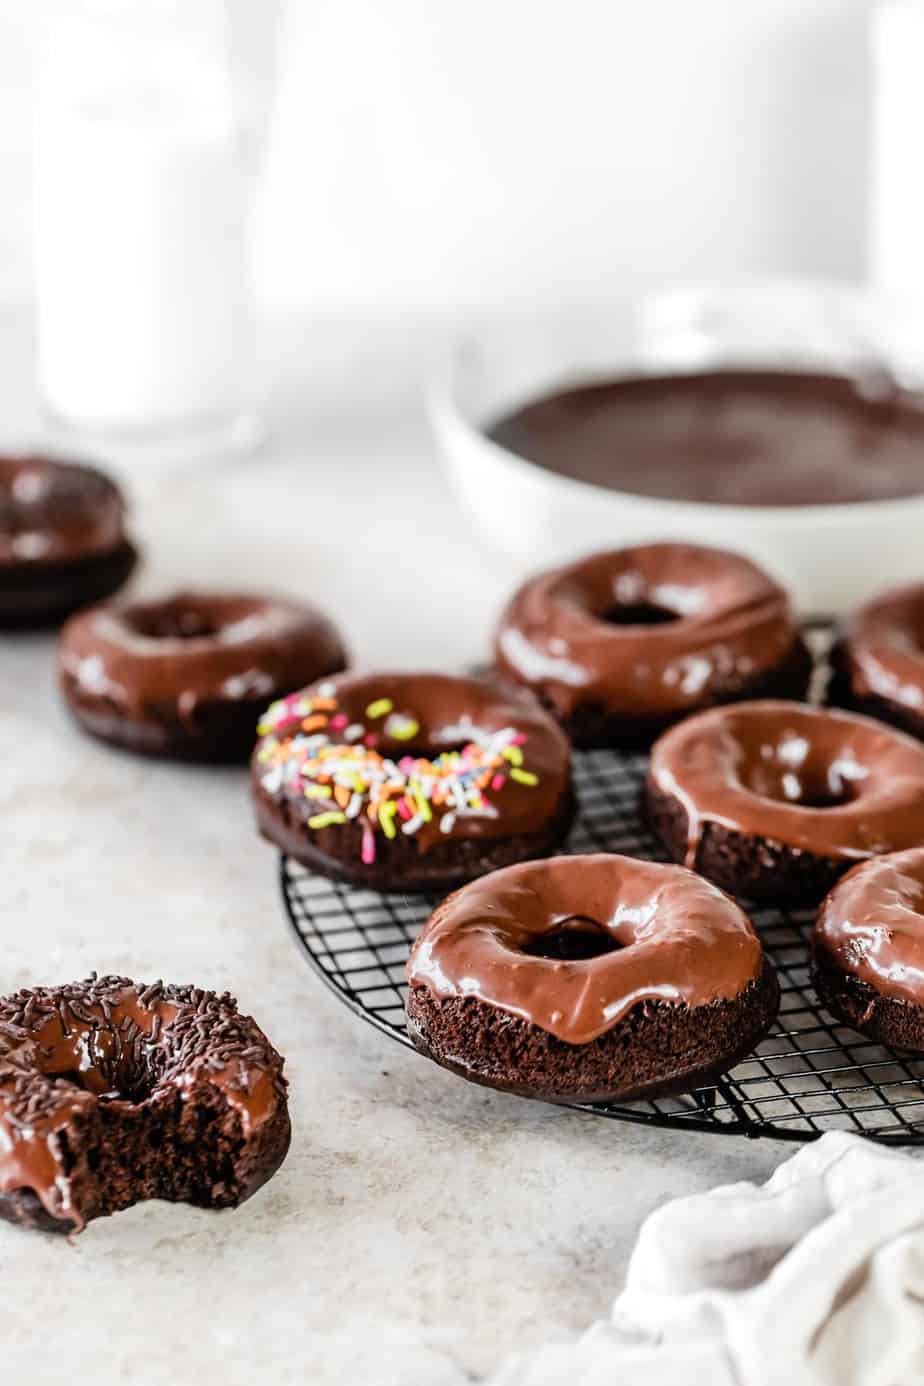 Chocolate cake mix donuts with sprinkles